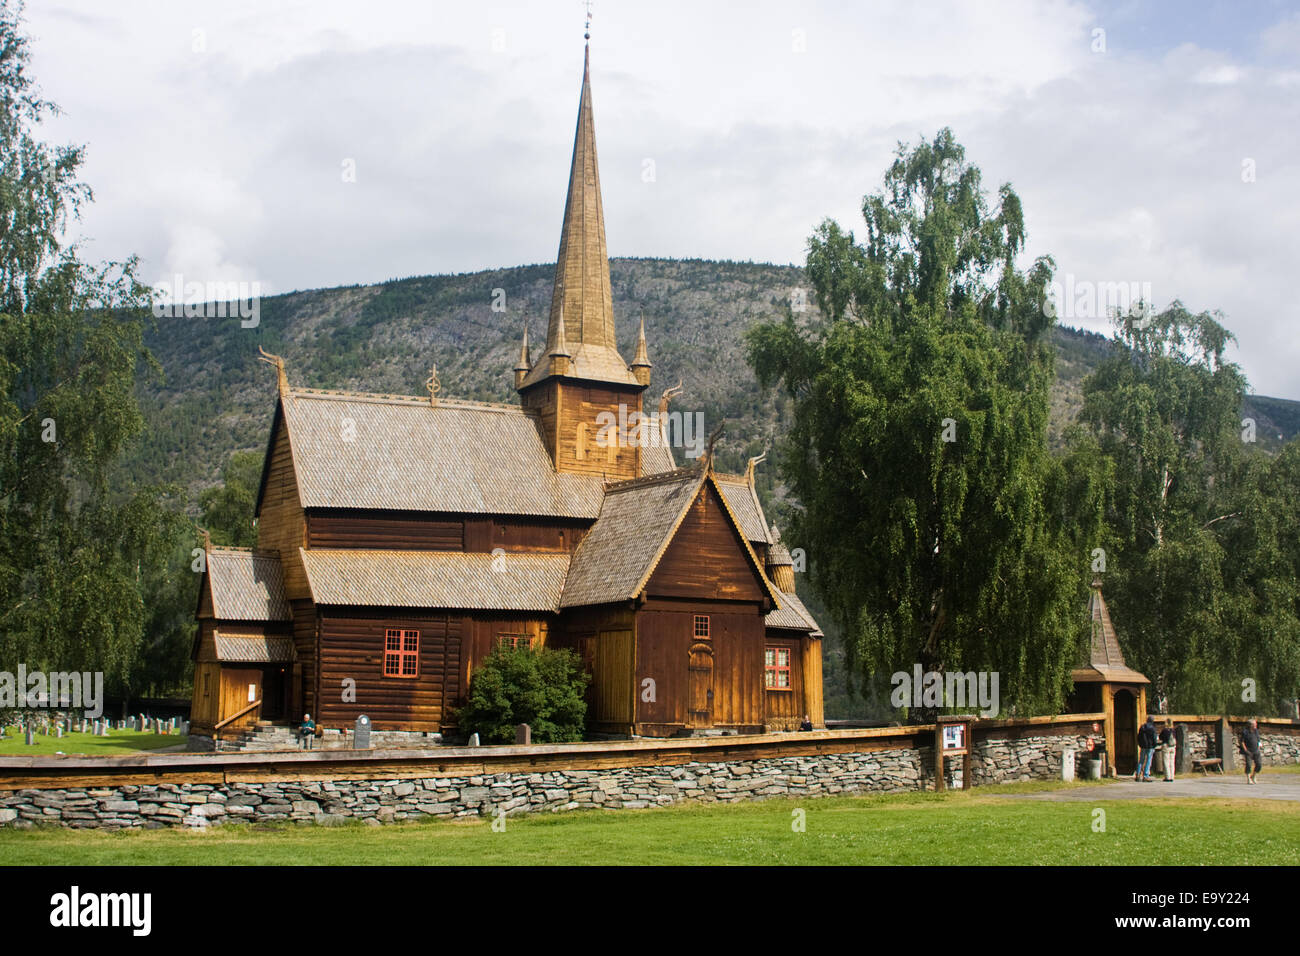 The medieval stave church in Lom, Norway Stock Photo